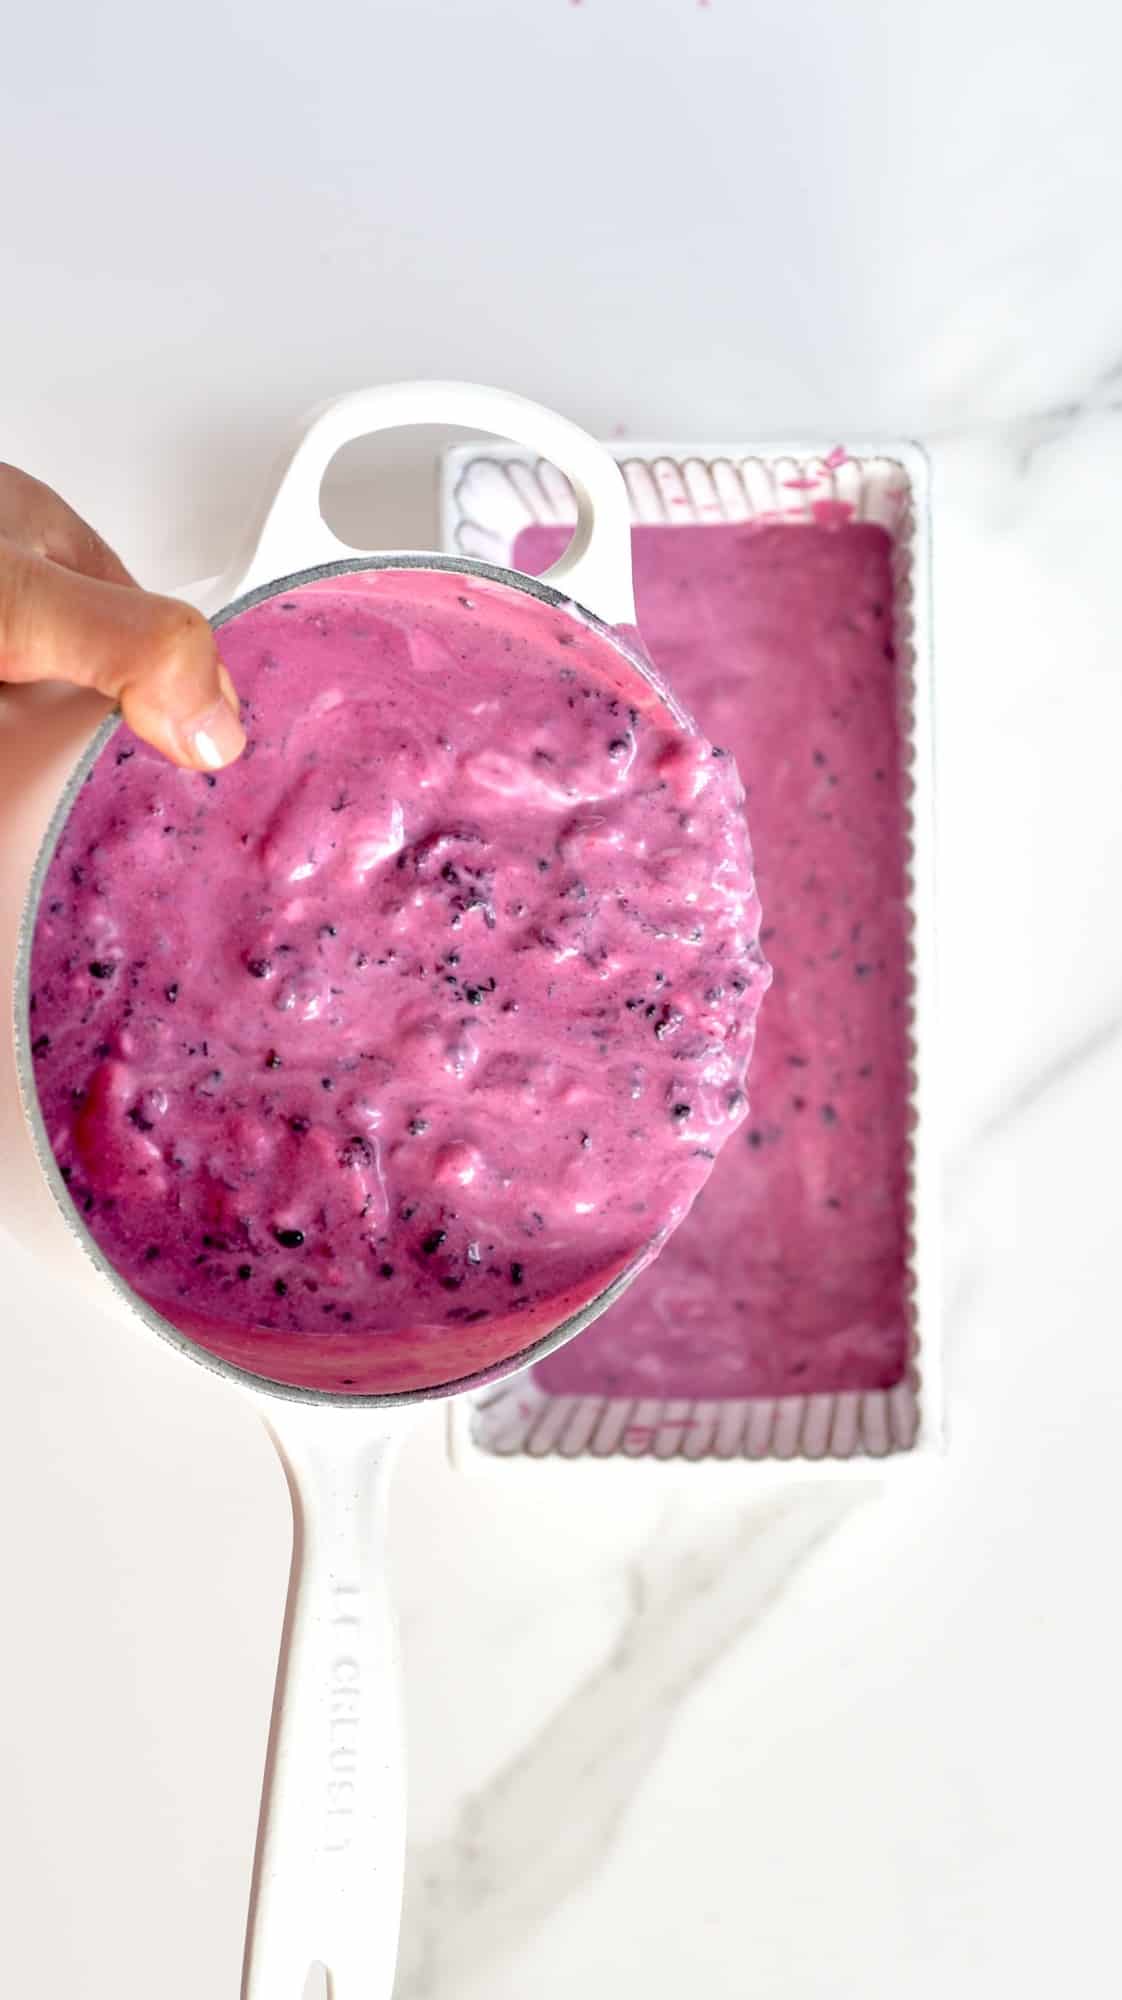 Pouring Blackberry Ice Cream Mixture into a glass tub